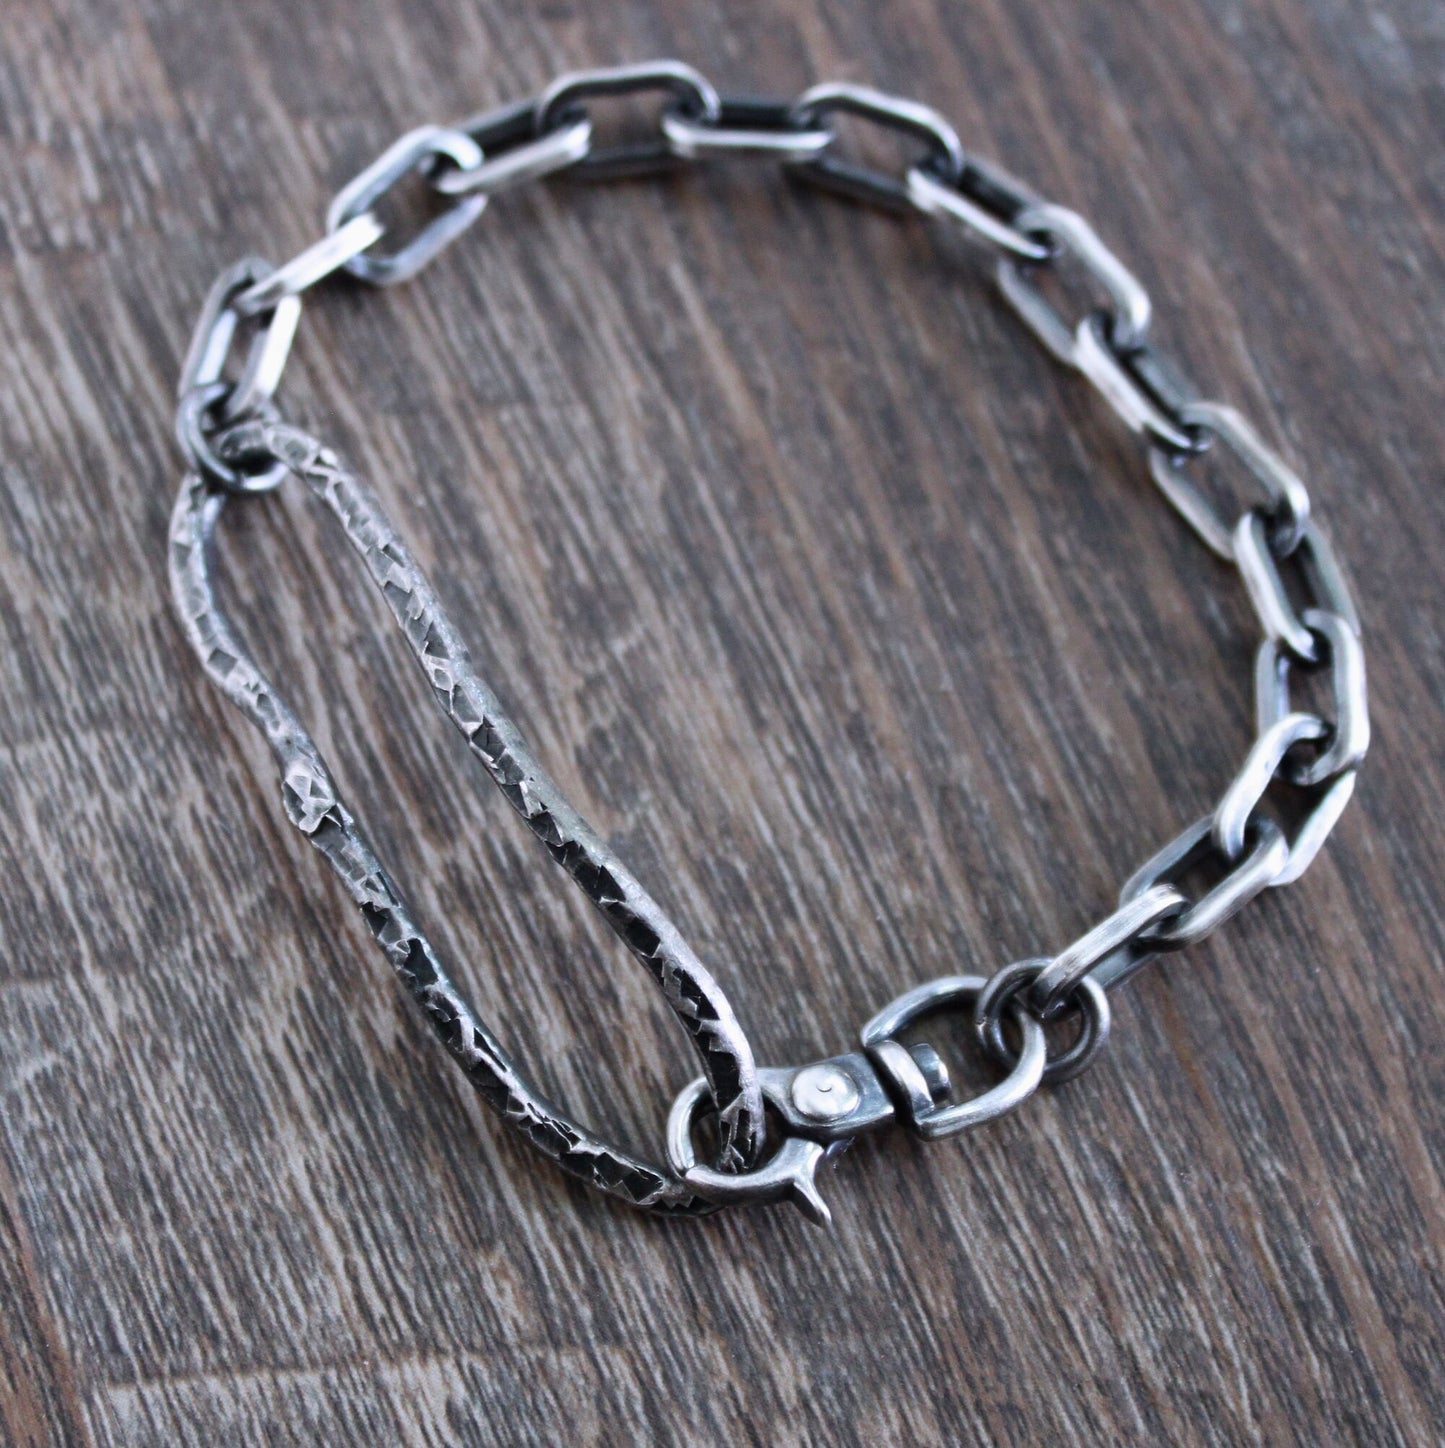 Rustic Silver Hammered Chain Bracelet